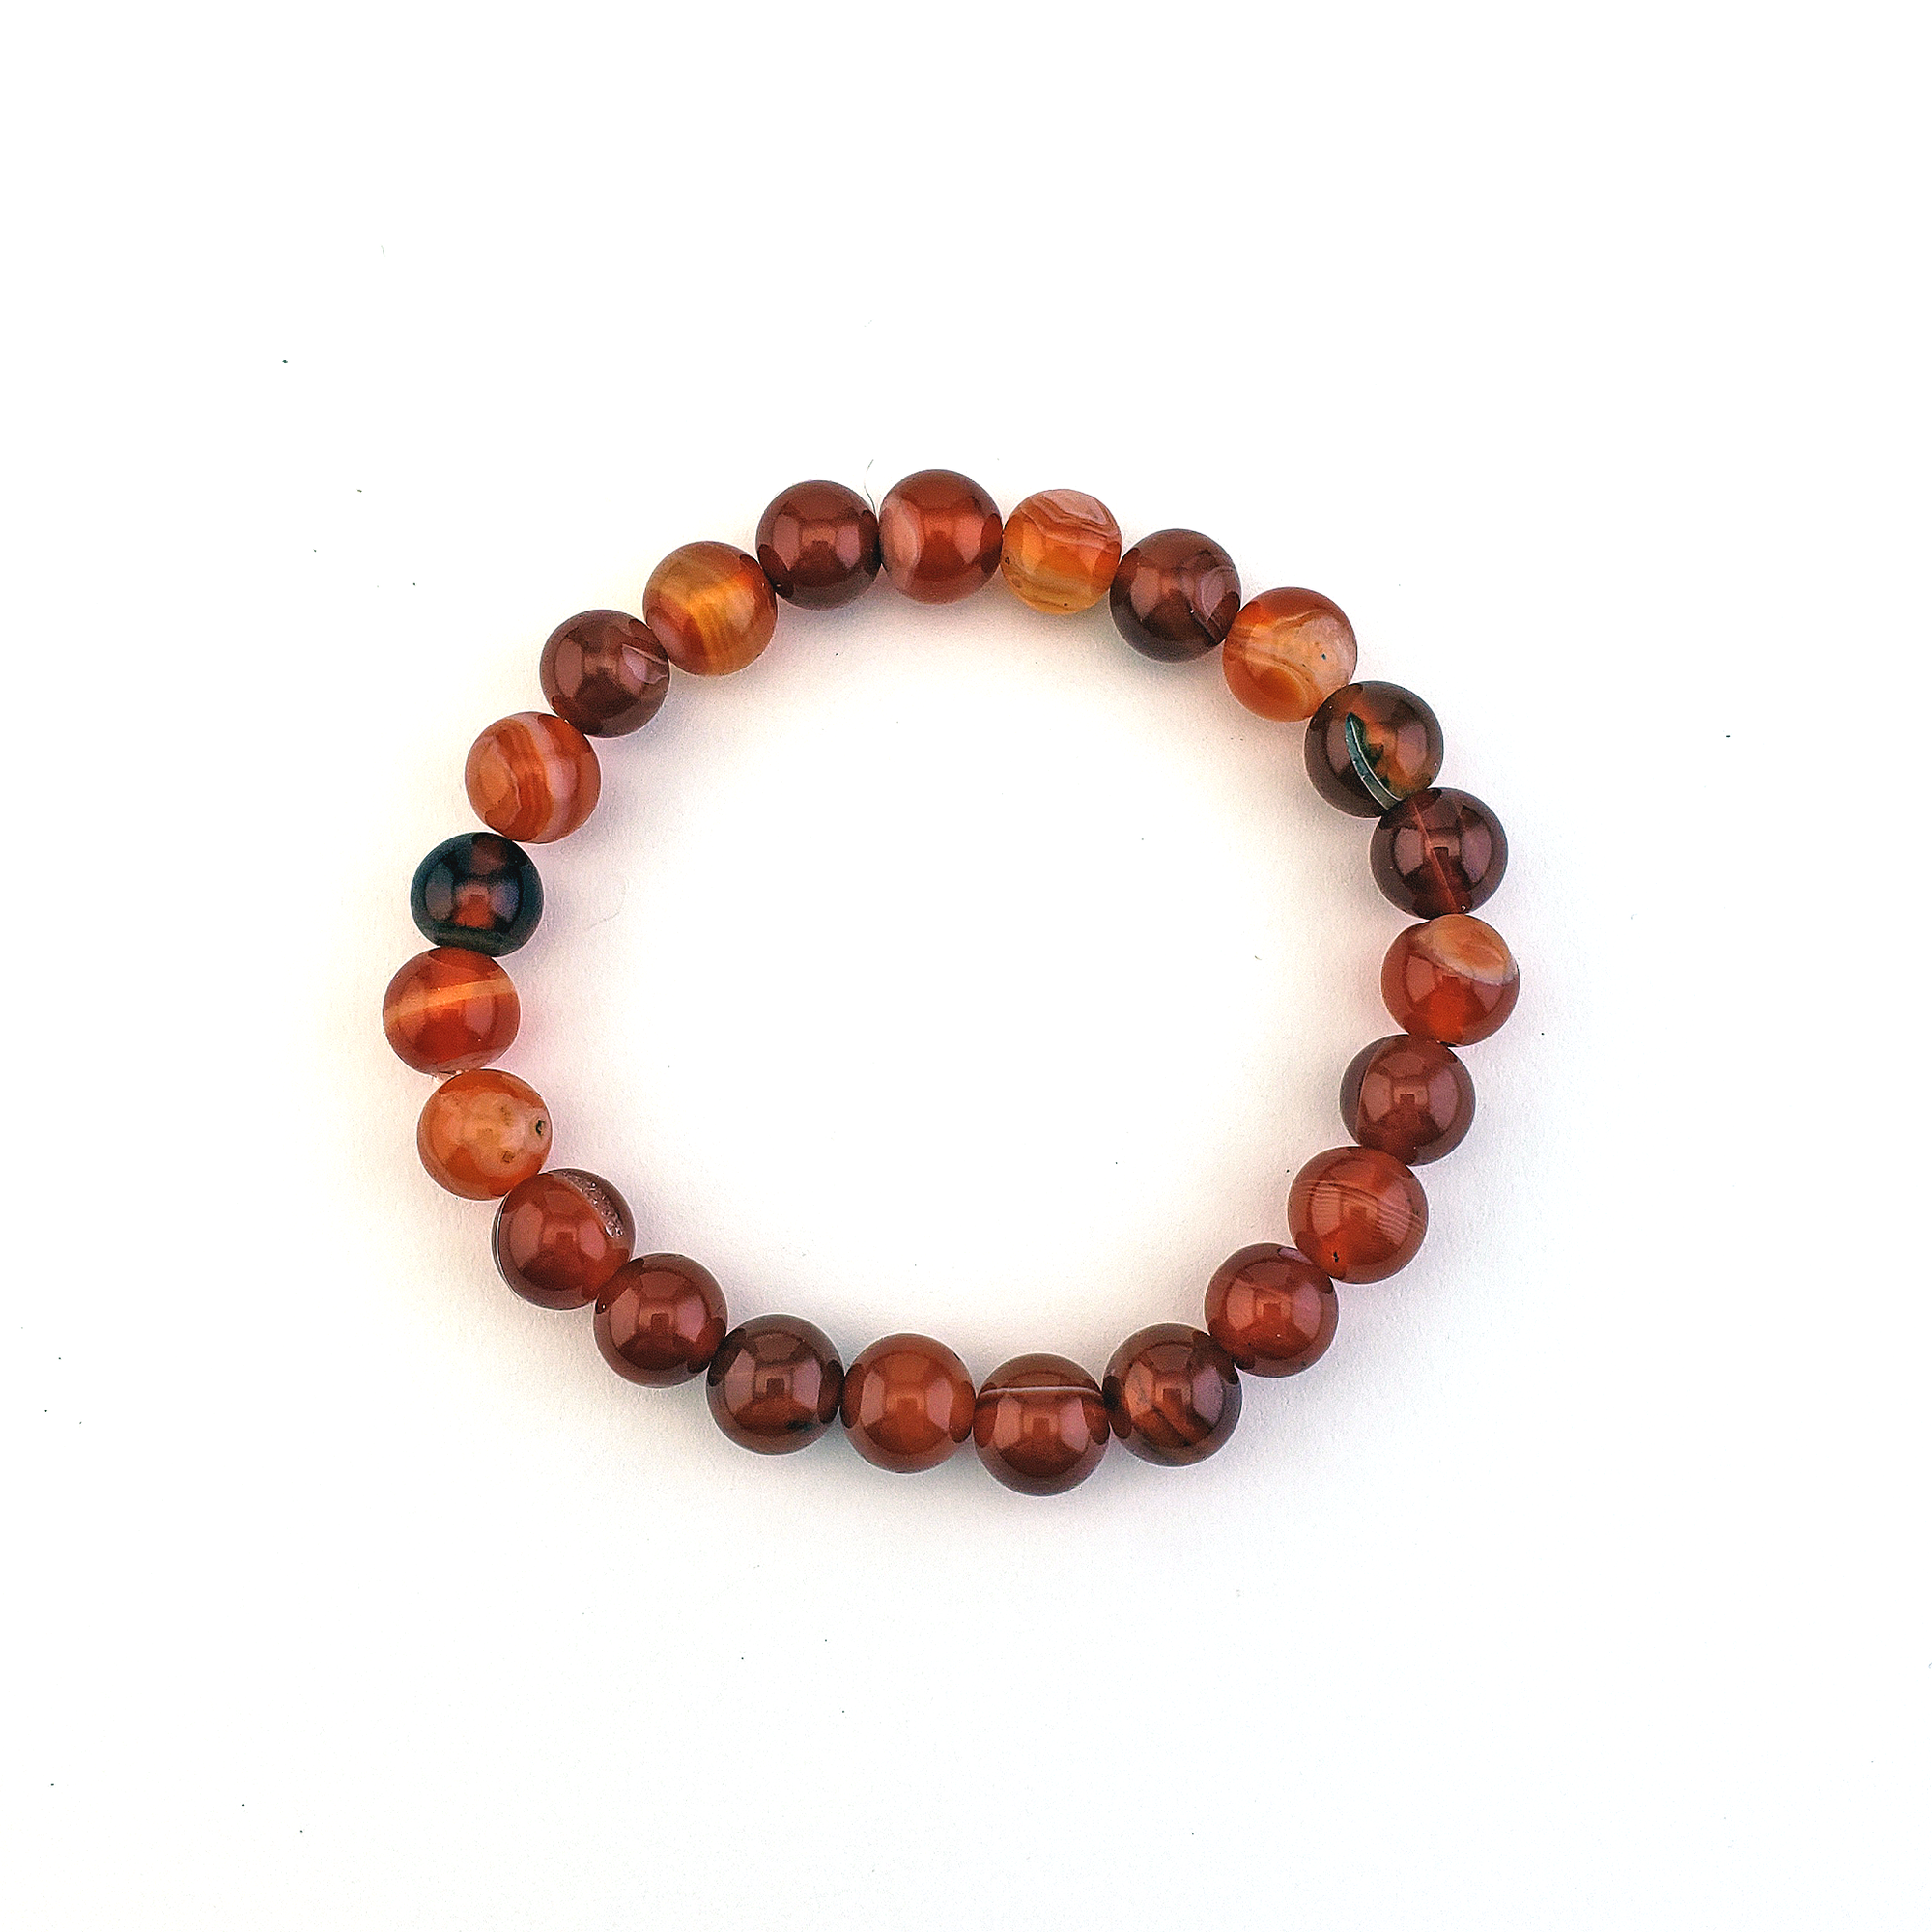 Natural Red Agate Crystal 7-8mm Bead Bracelet - On White Background